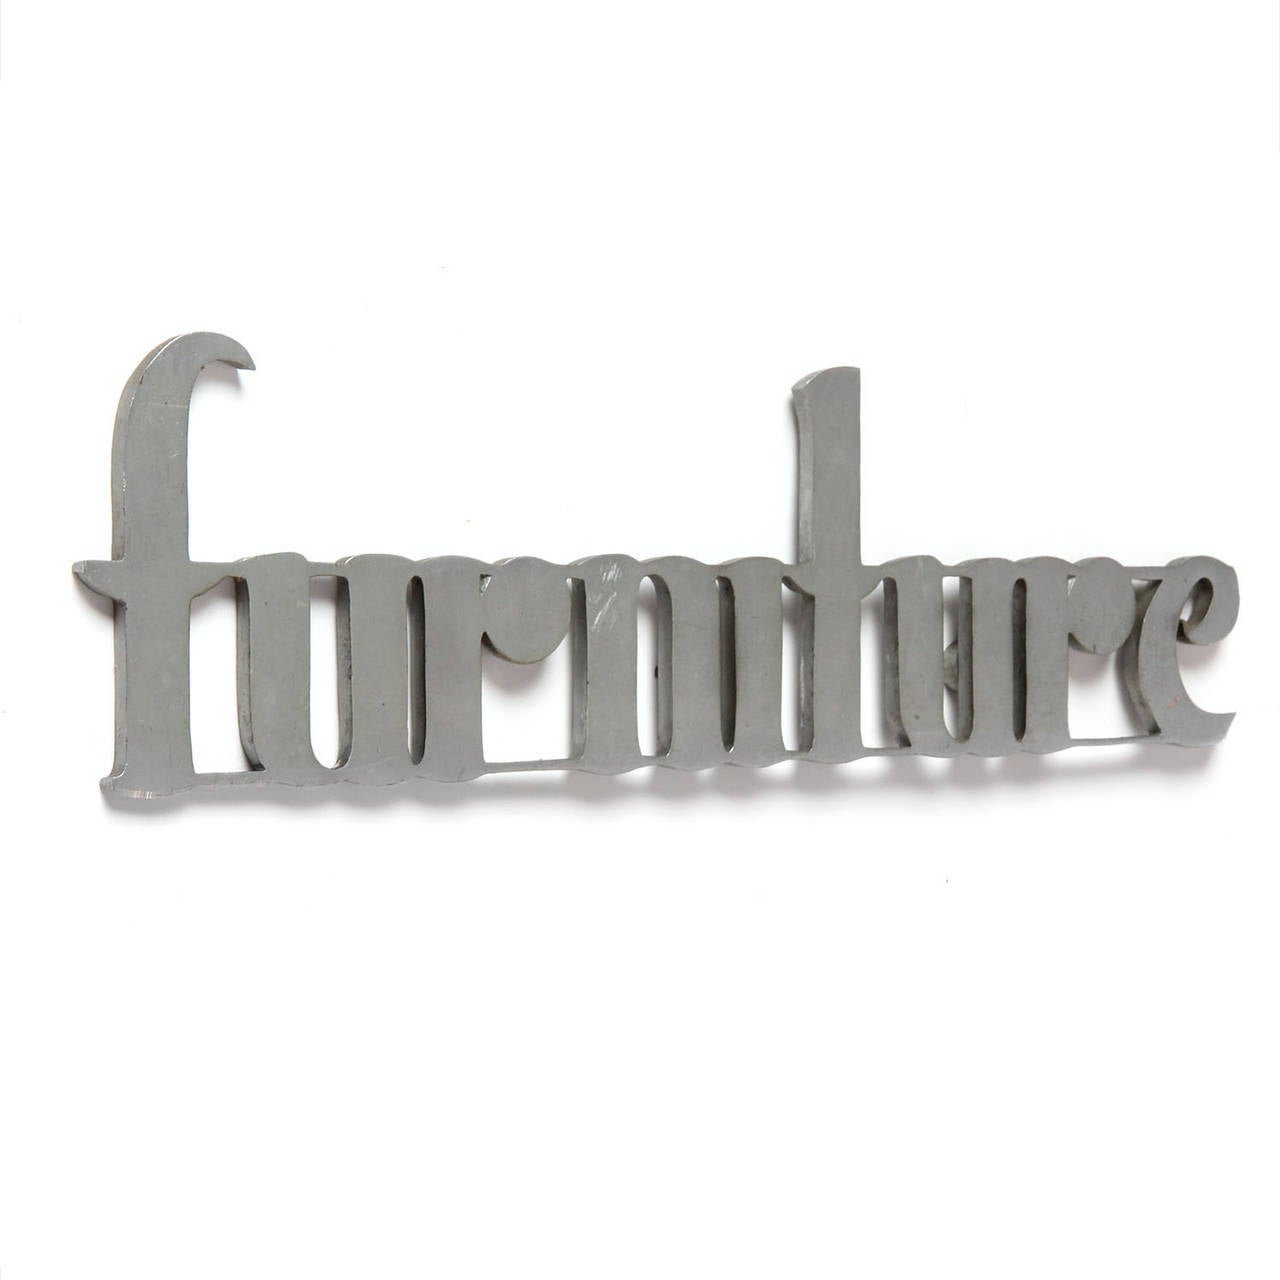 A delightful, substantial and graphic furniture store sign in a lower case Art Deco font crafted of die cut steel.